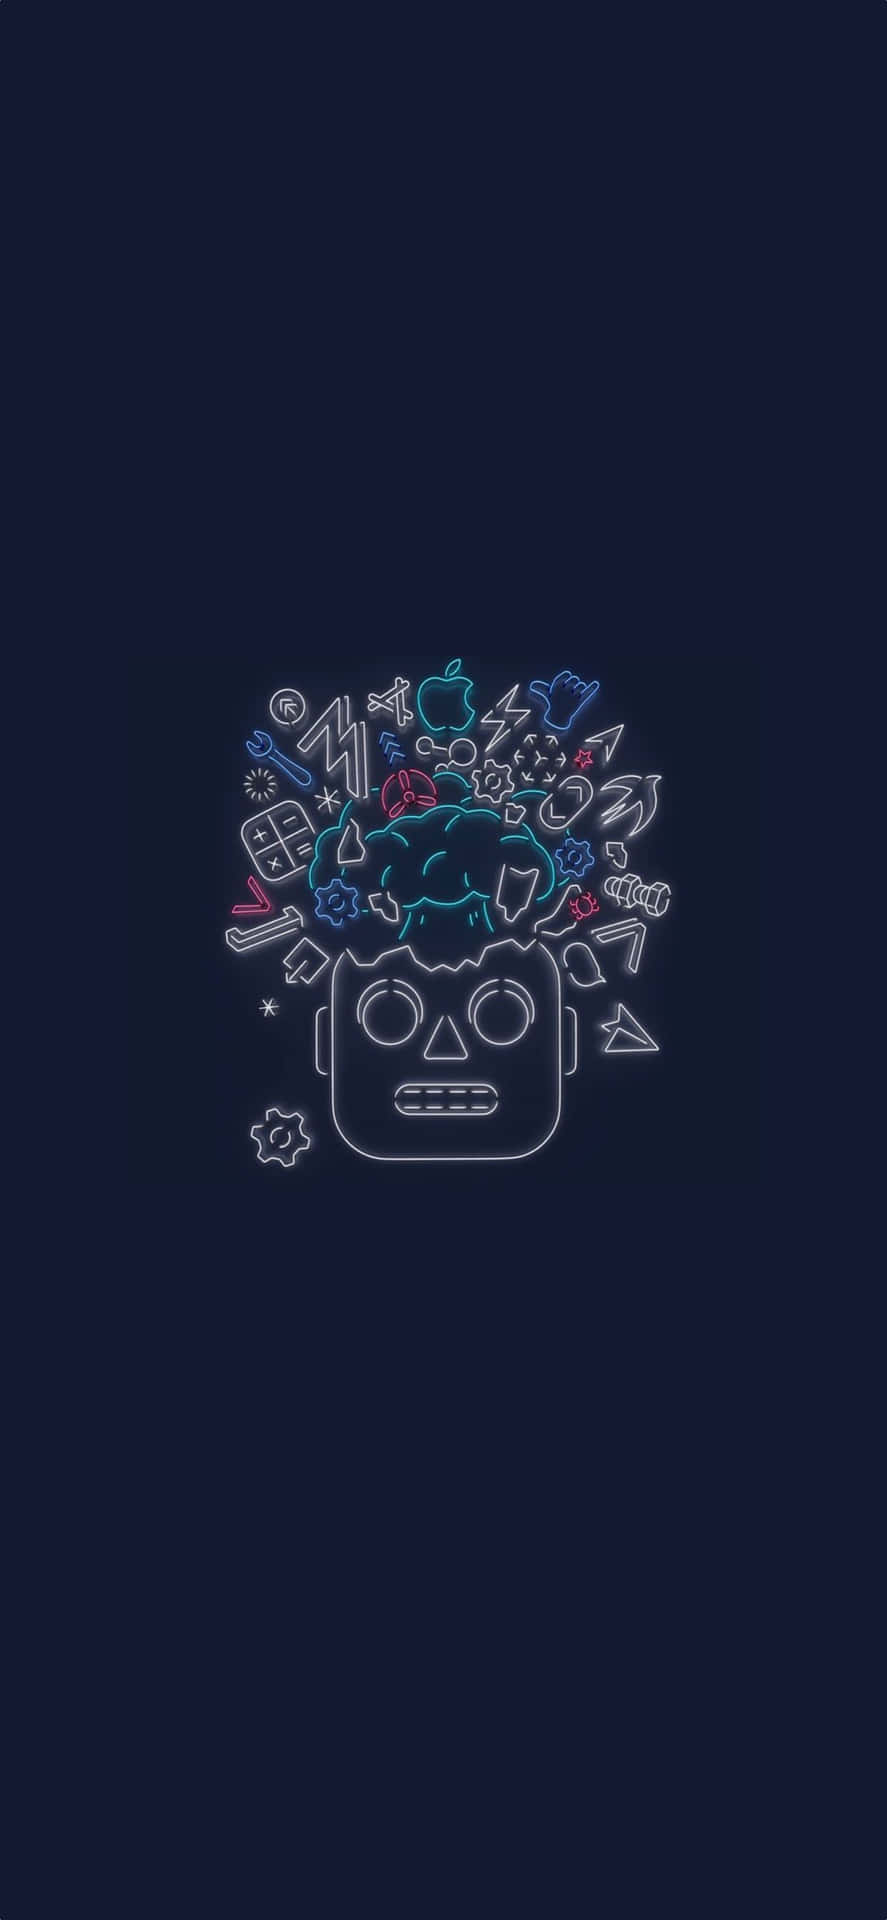 An Image Of An Apple Logo With A Bunch Of Different Objects Wallpaper